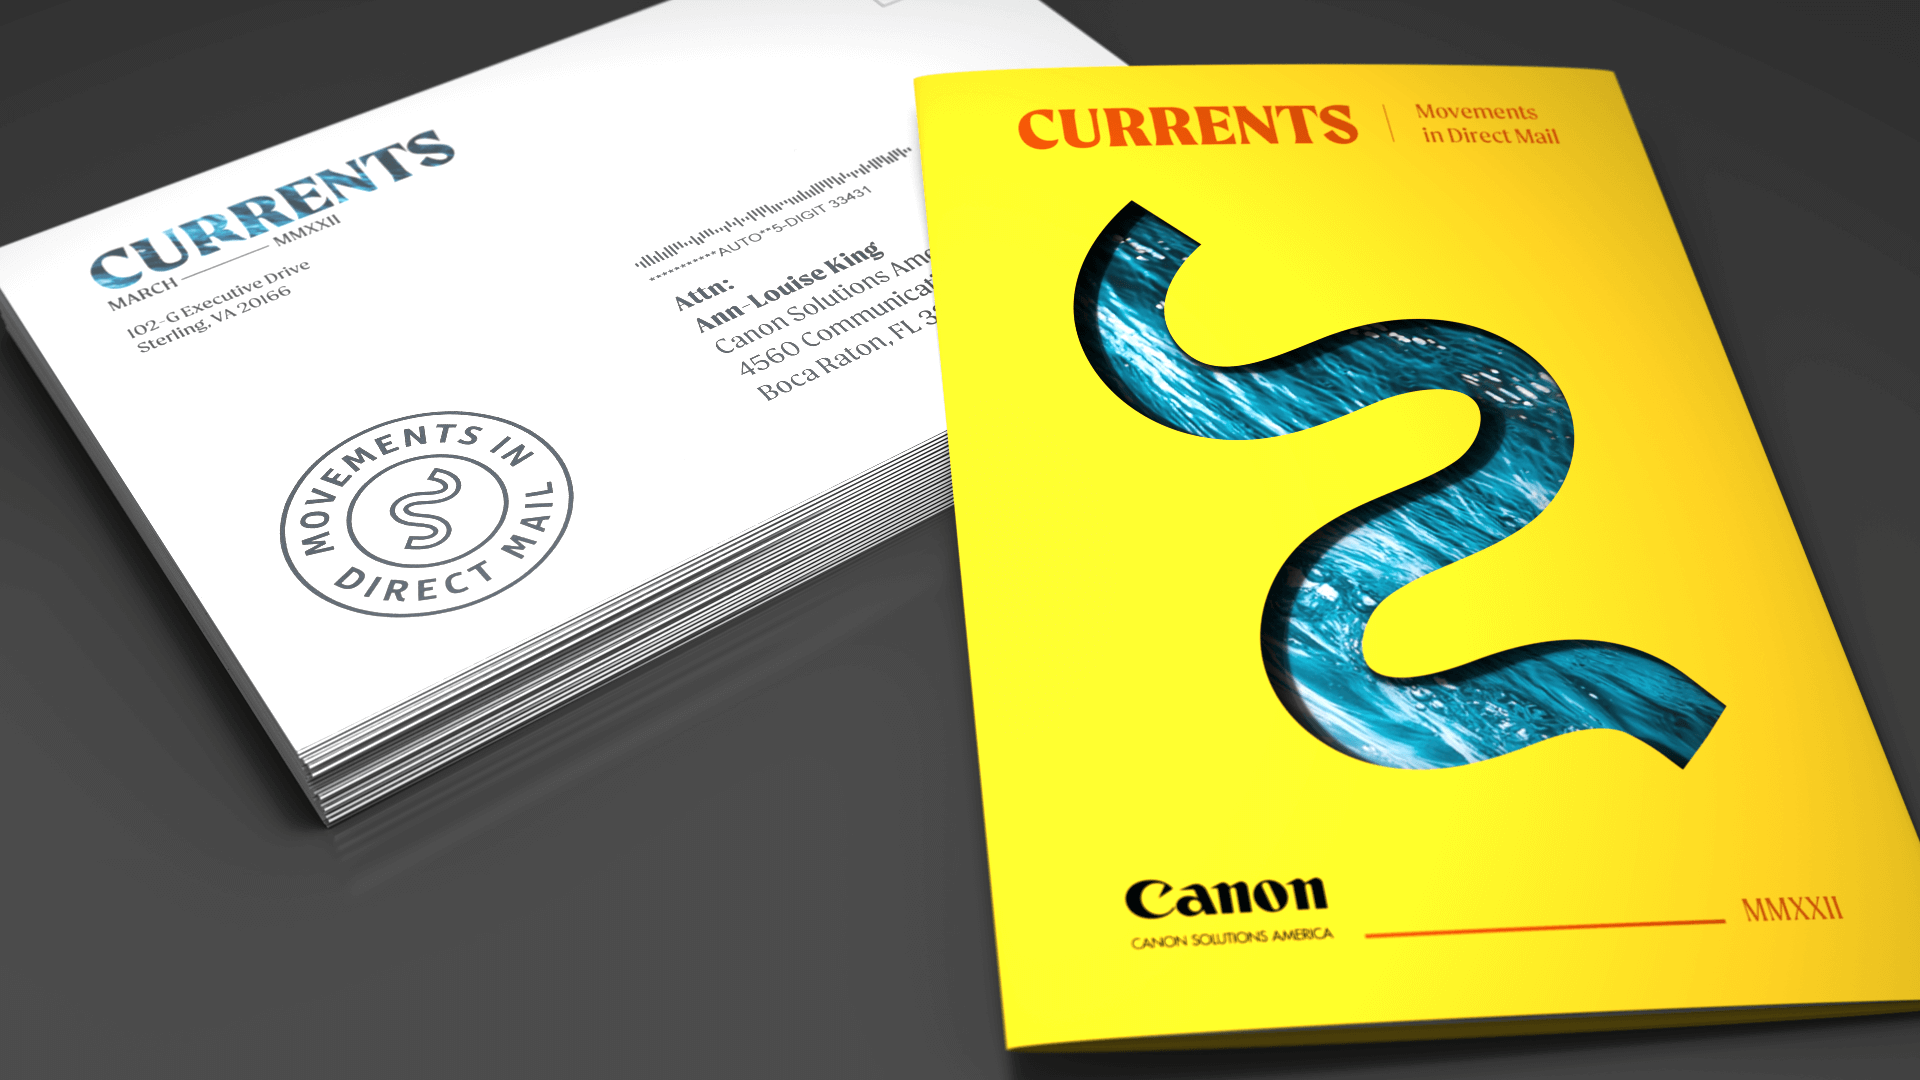 Project Spotlight: An Editorial Approach Helps Demonstrate Current Trends in Direct Mail